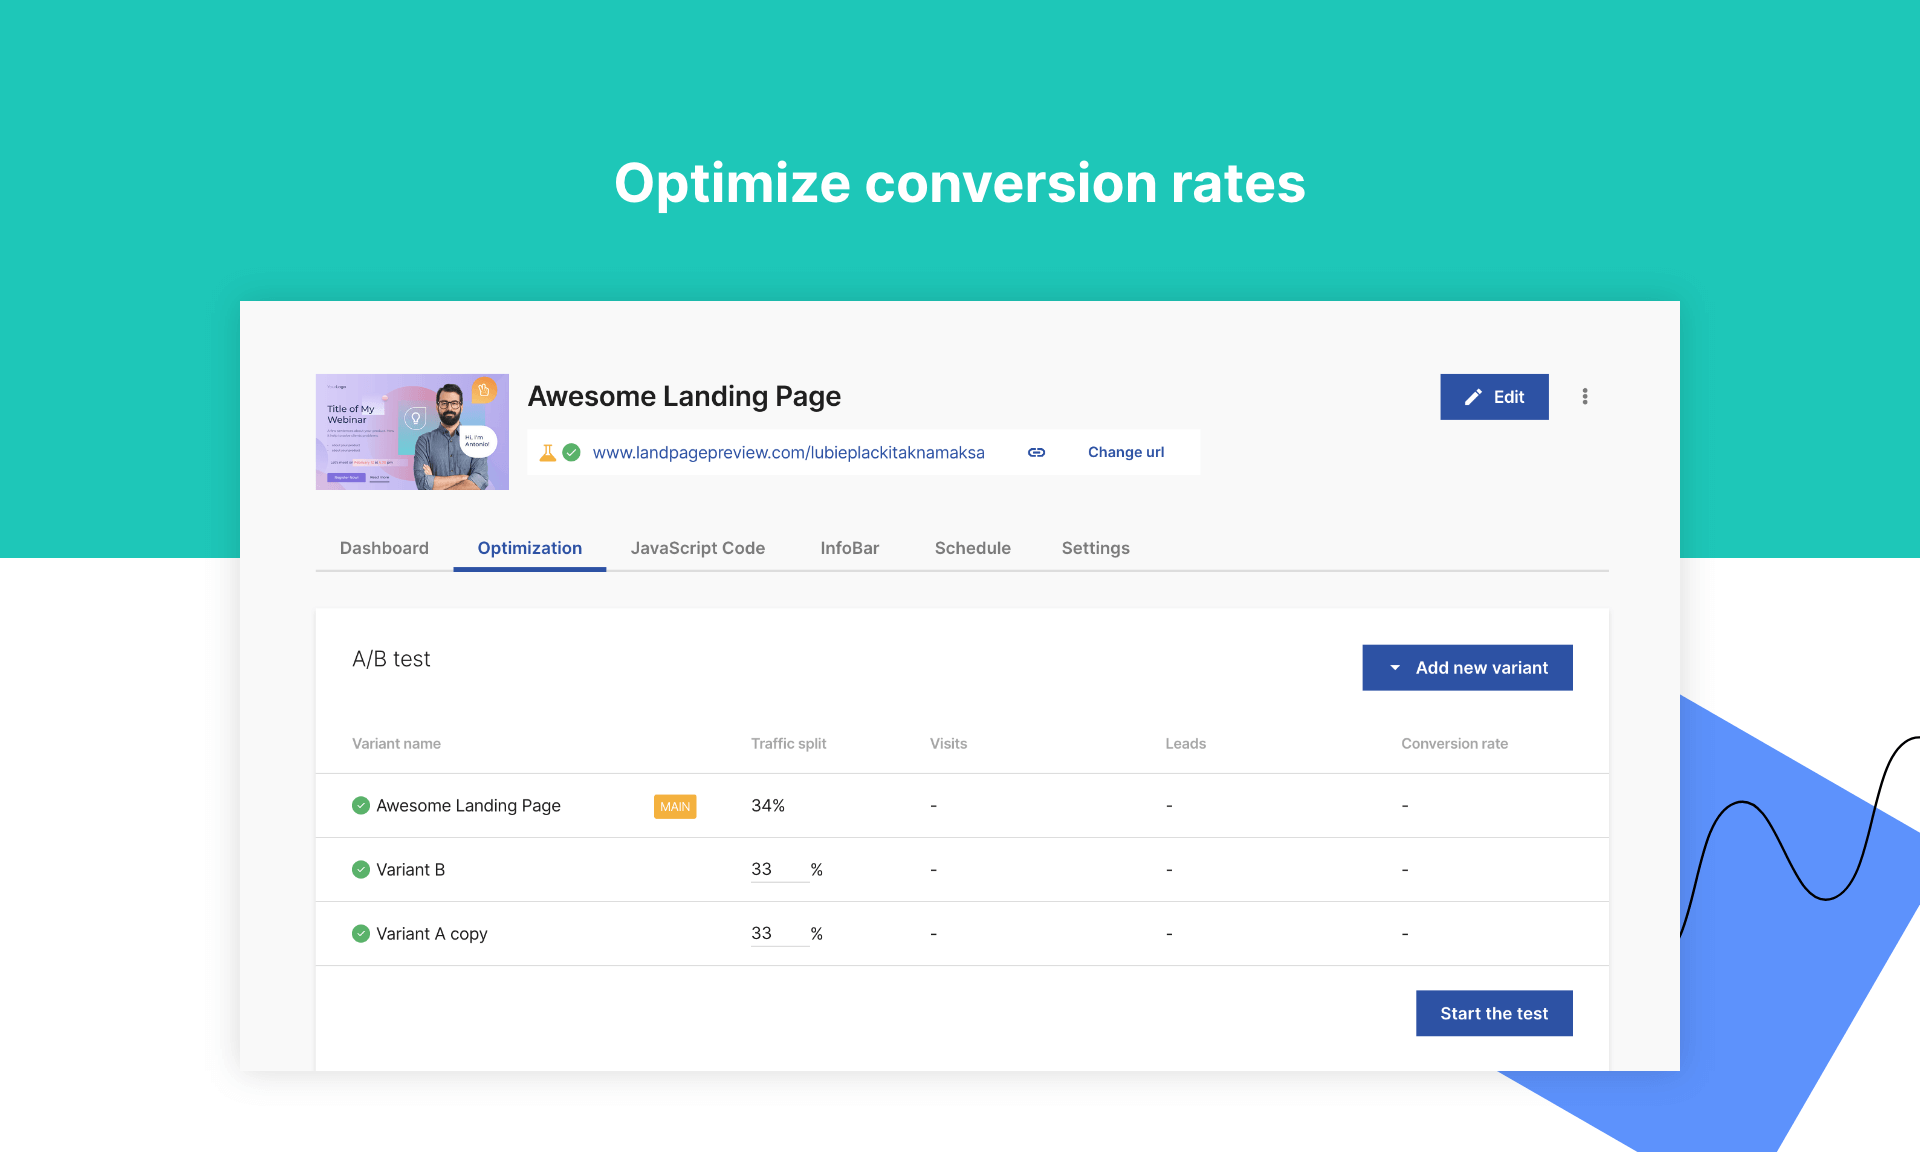 Use A/B tests to compare different versions of your landing page and point out which one convert more. Identify elements (images, videos, forms, etc.) or copy pieces that perform best to make data-based design decisions and boost your conversion rates.